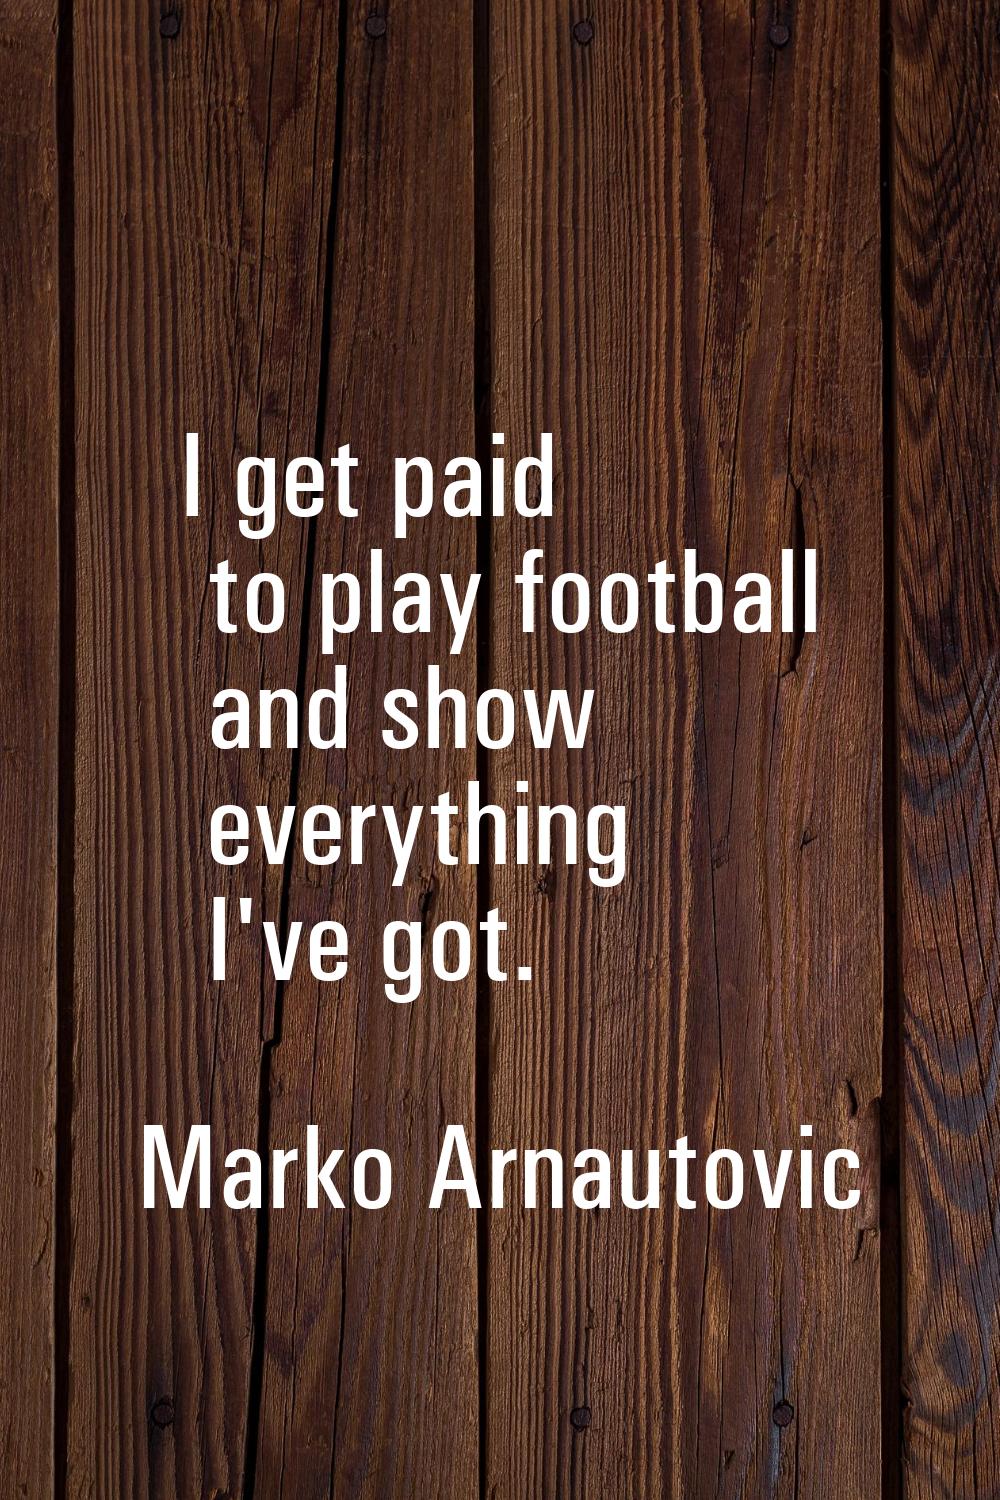 I get paid to play football and show everything I've got.